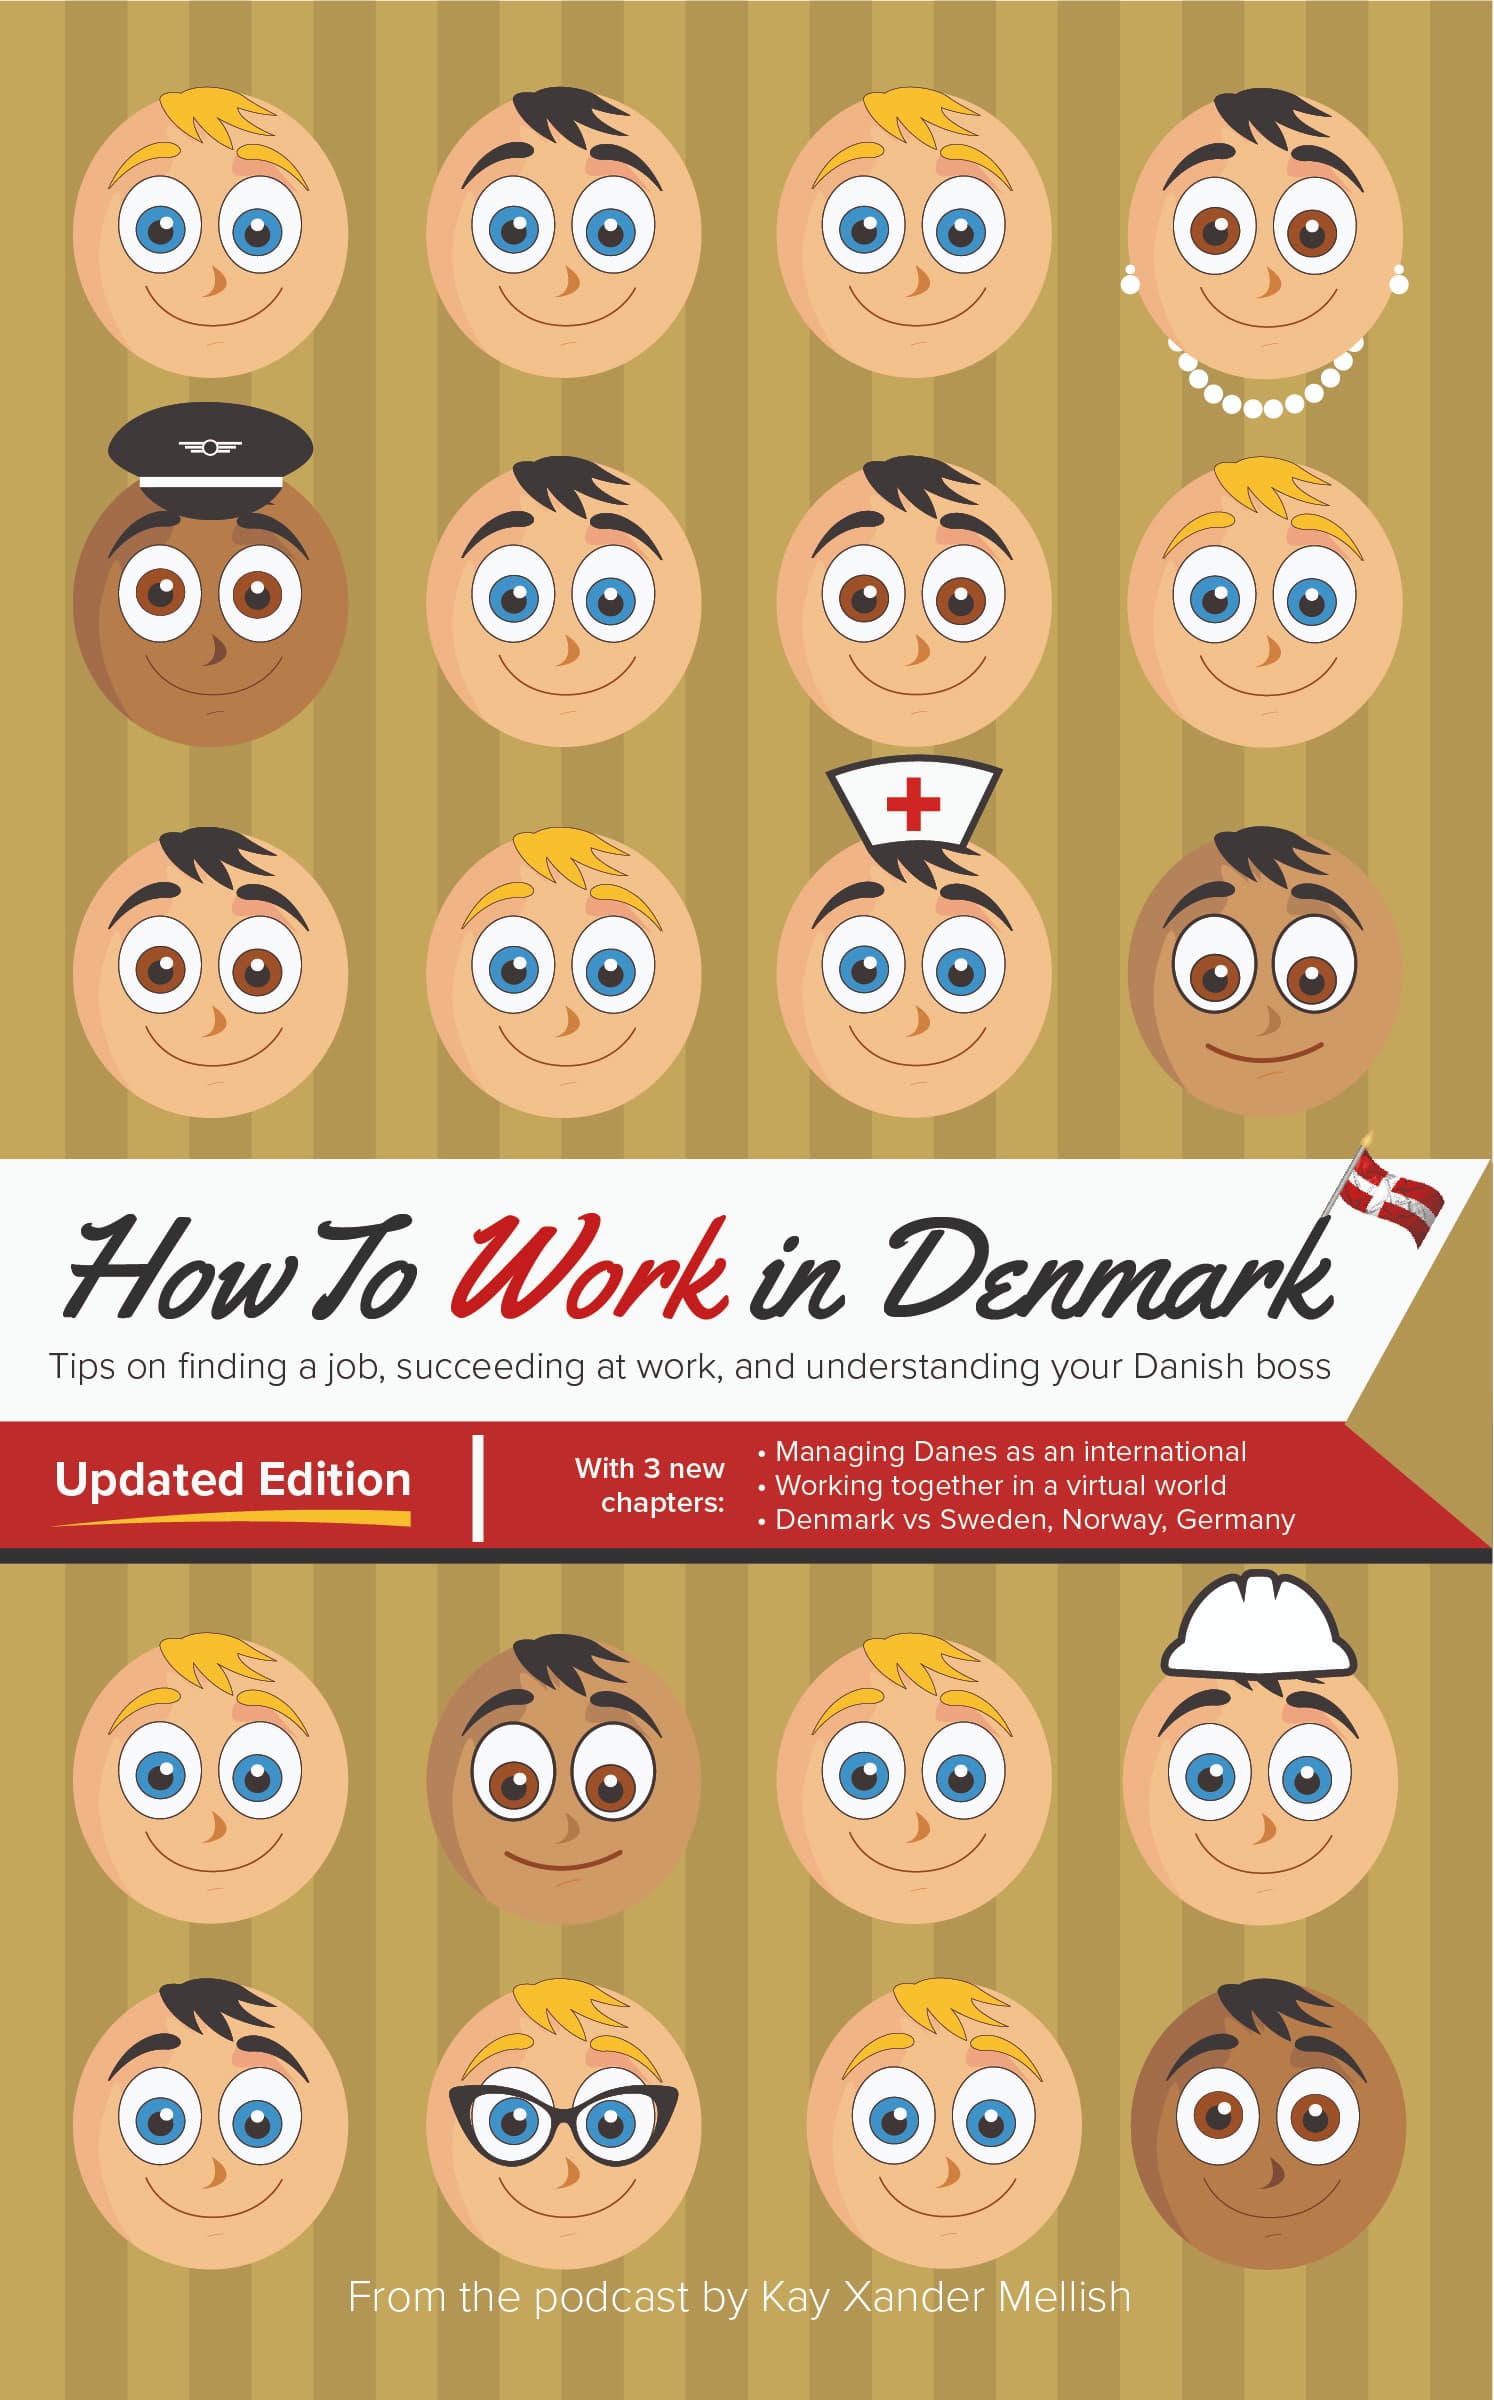 How to Work in Denmark book